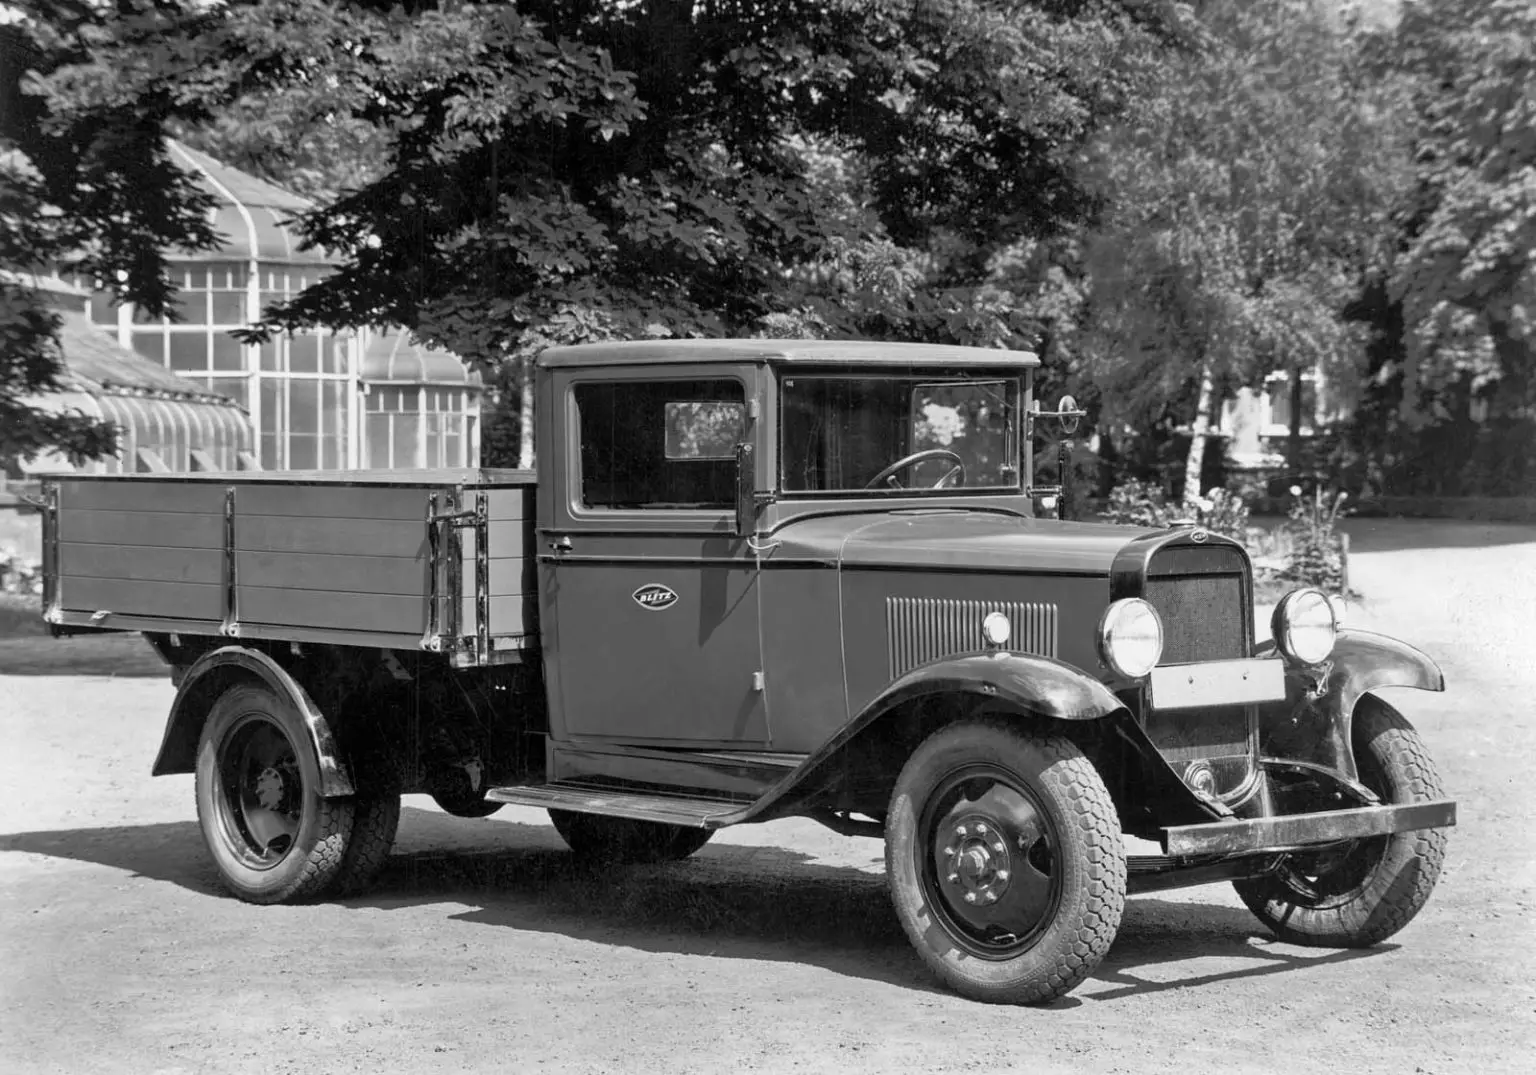 1930, The Blitz. The Opel Truck With a Very Long History